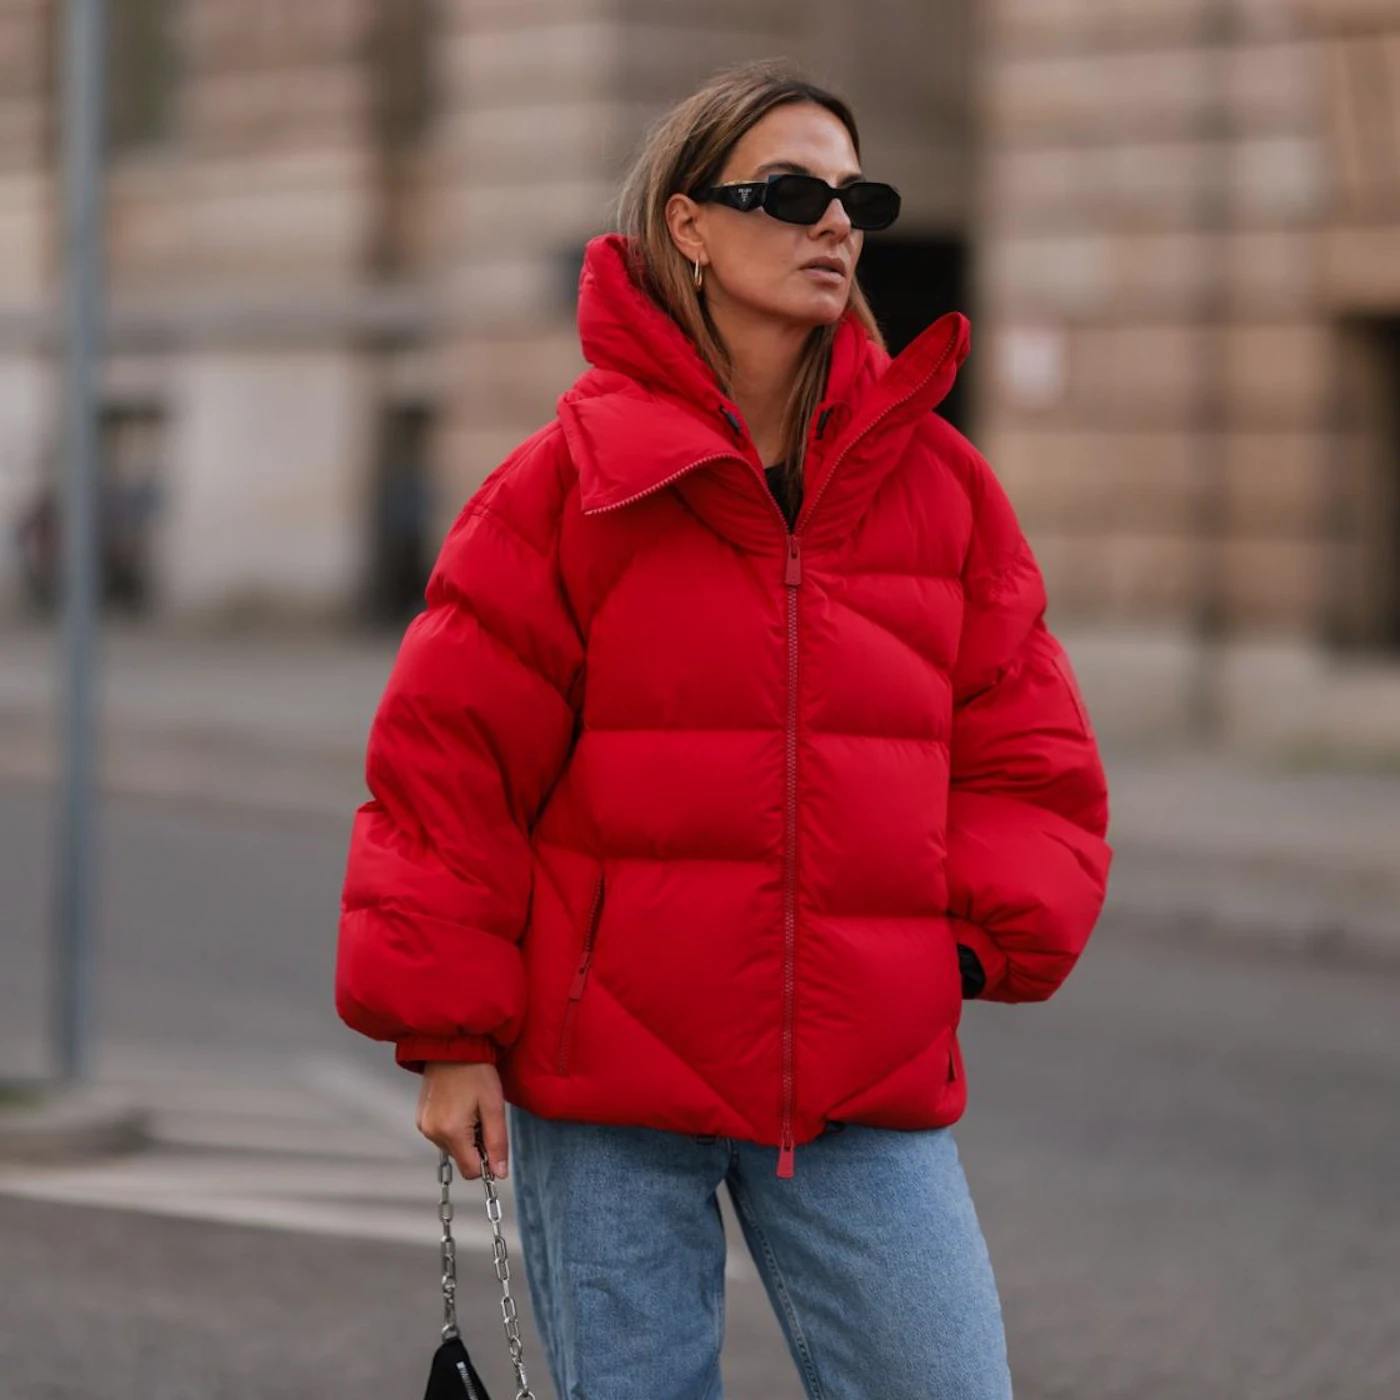 Winter fashion trends 2021: 11 best quilted jackets